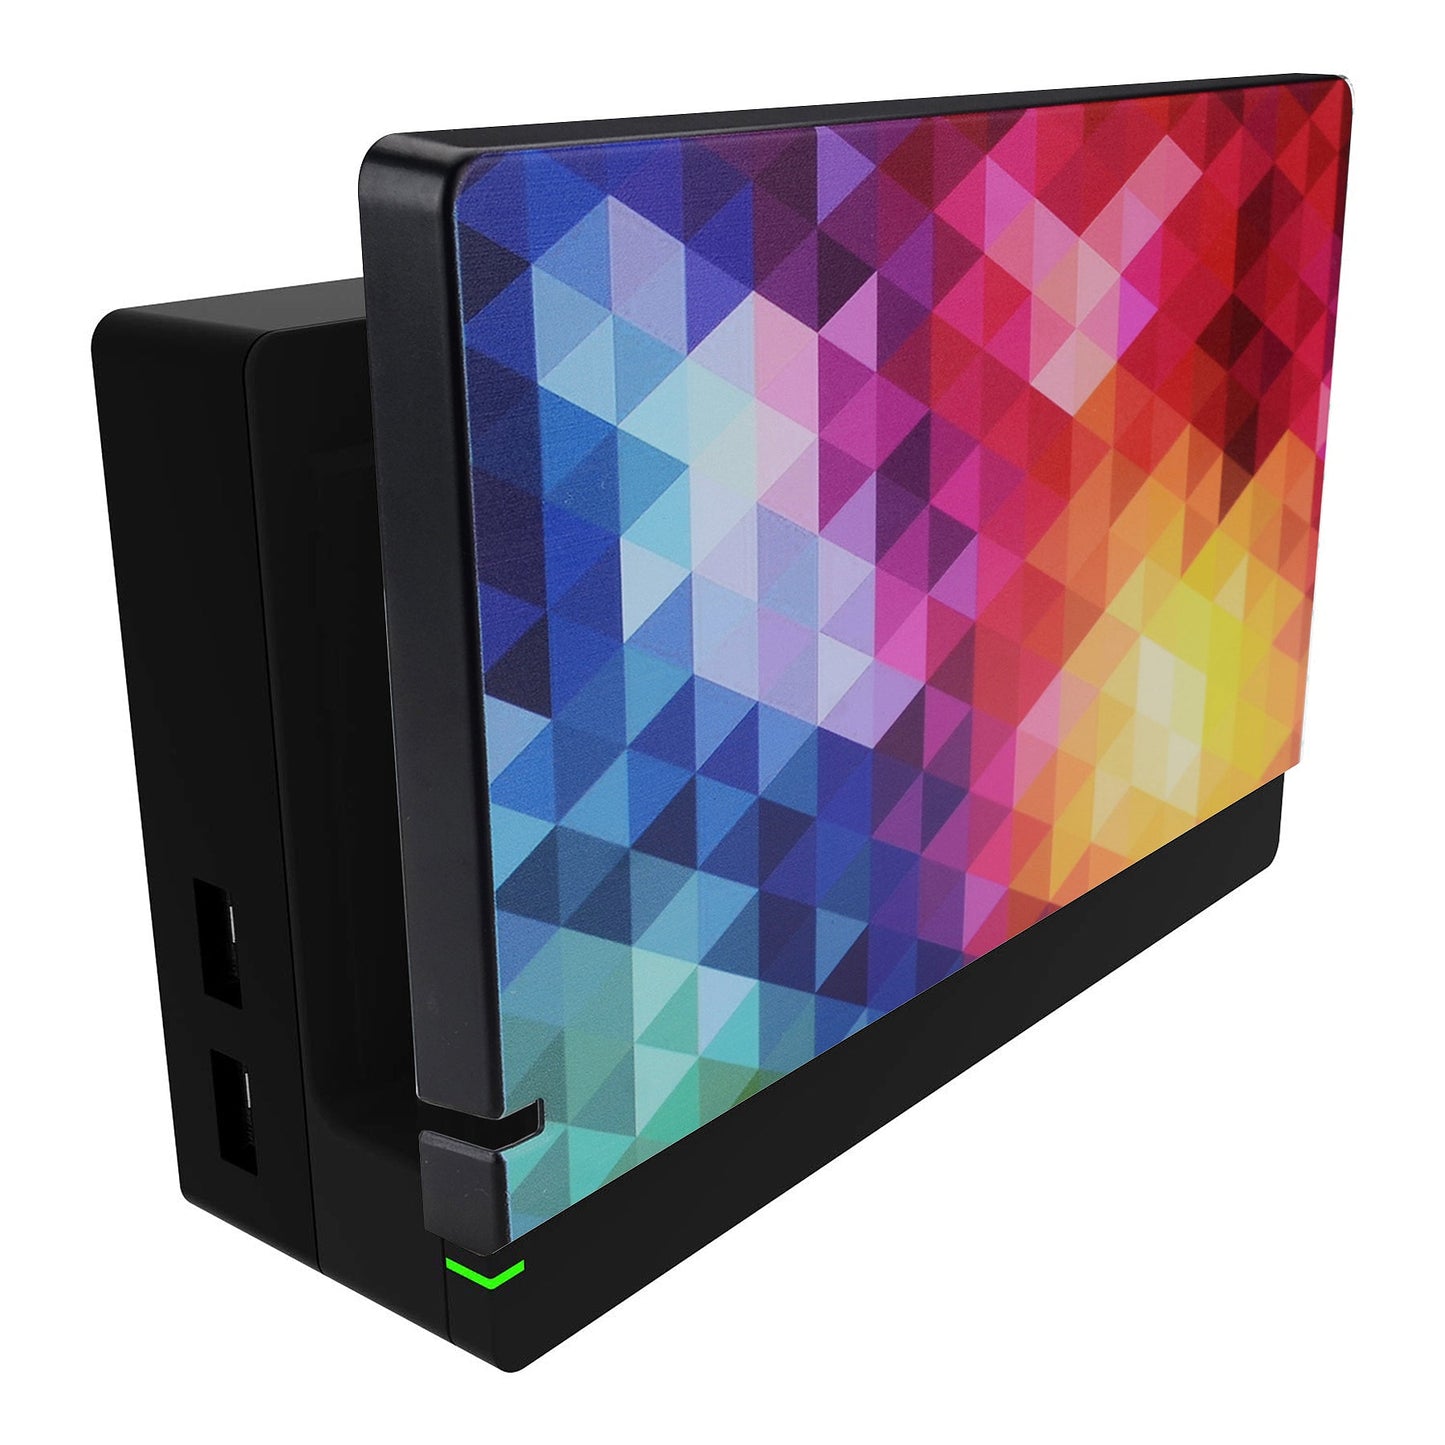 PlayVital Colorful Triangle Patterned Custom Protective Case for NS Switch Charging Dock, Dust Anti Scratch Dust Hard Cover for NS Switch Dock - Dock NOT Included - NTG7003 PlayVital